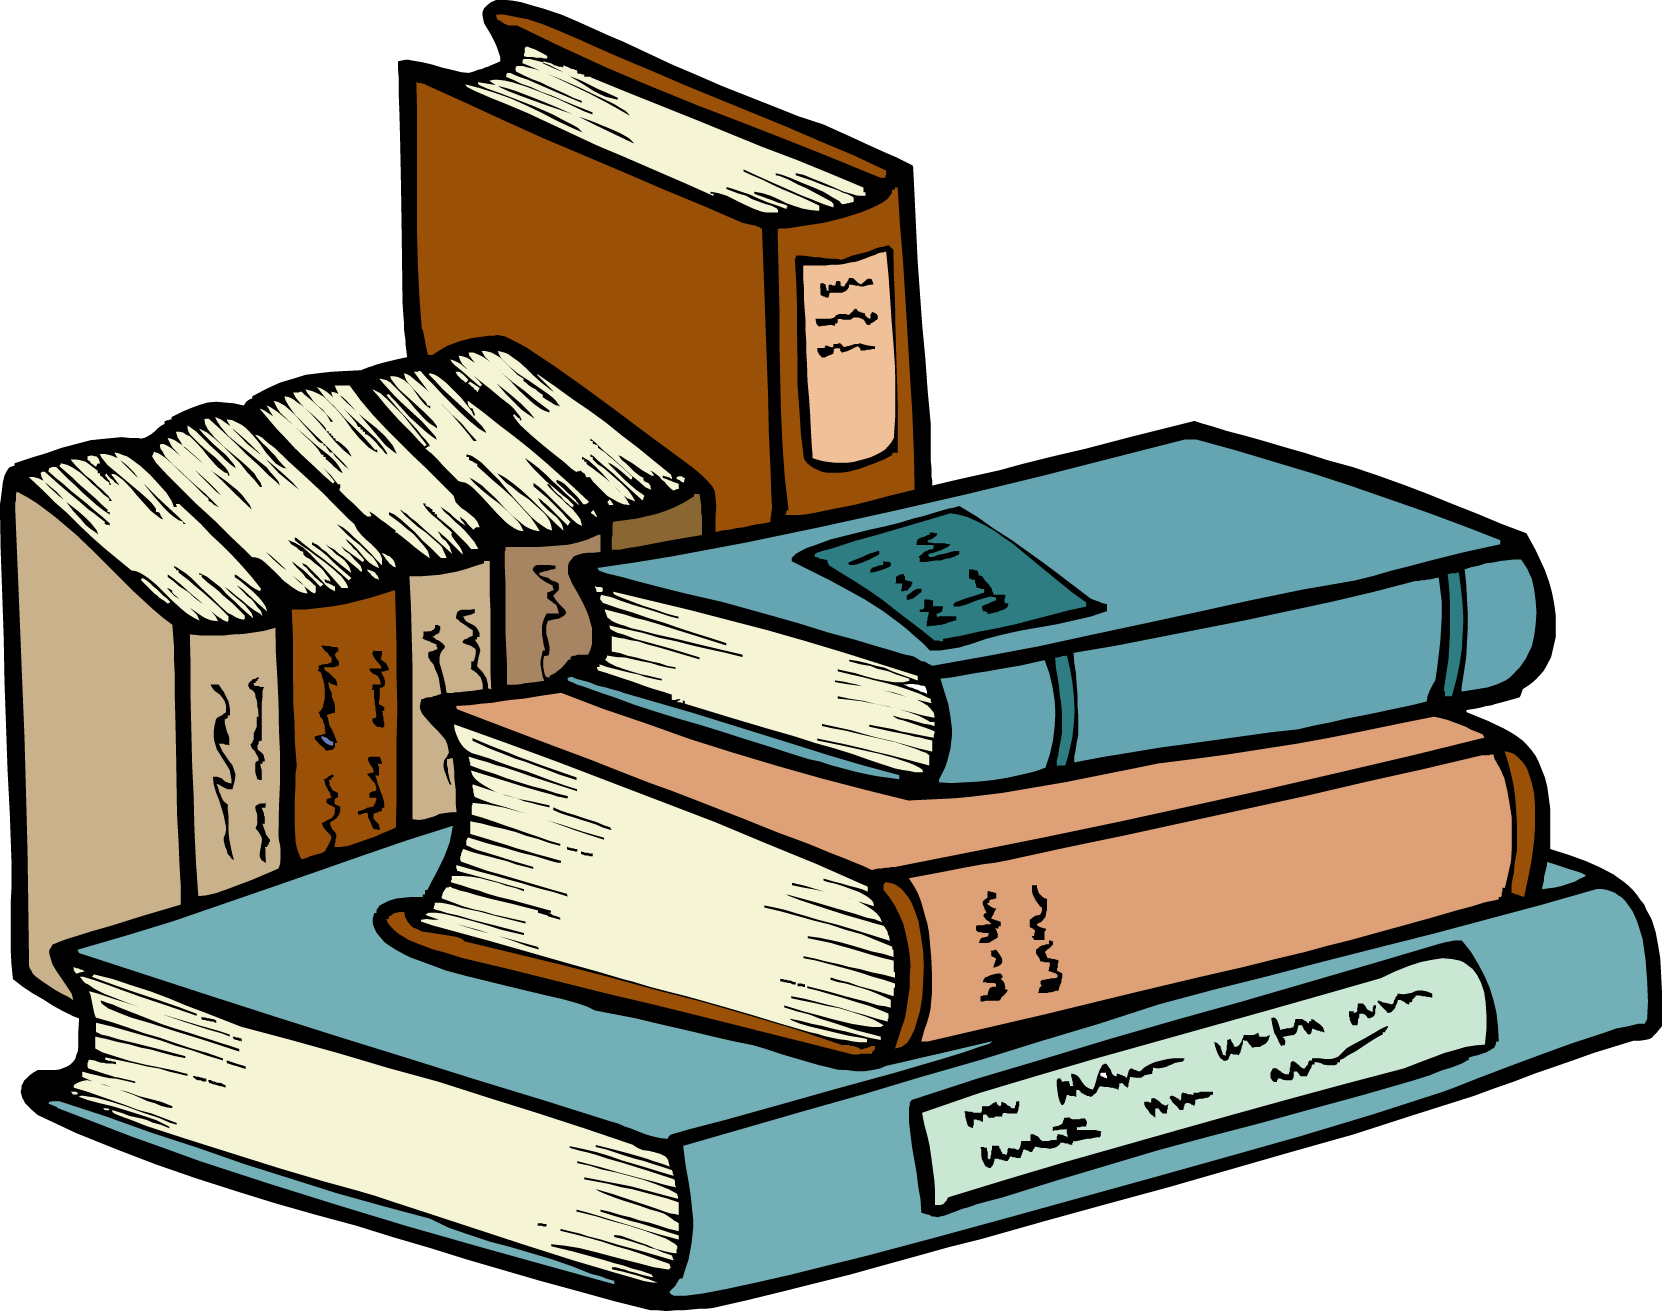 Stack Of Books Clipart - Free Clipart Images